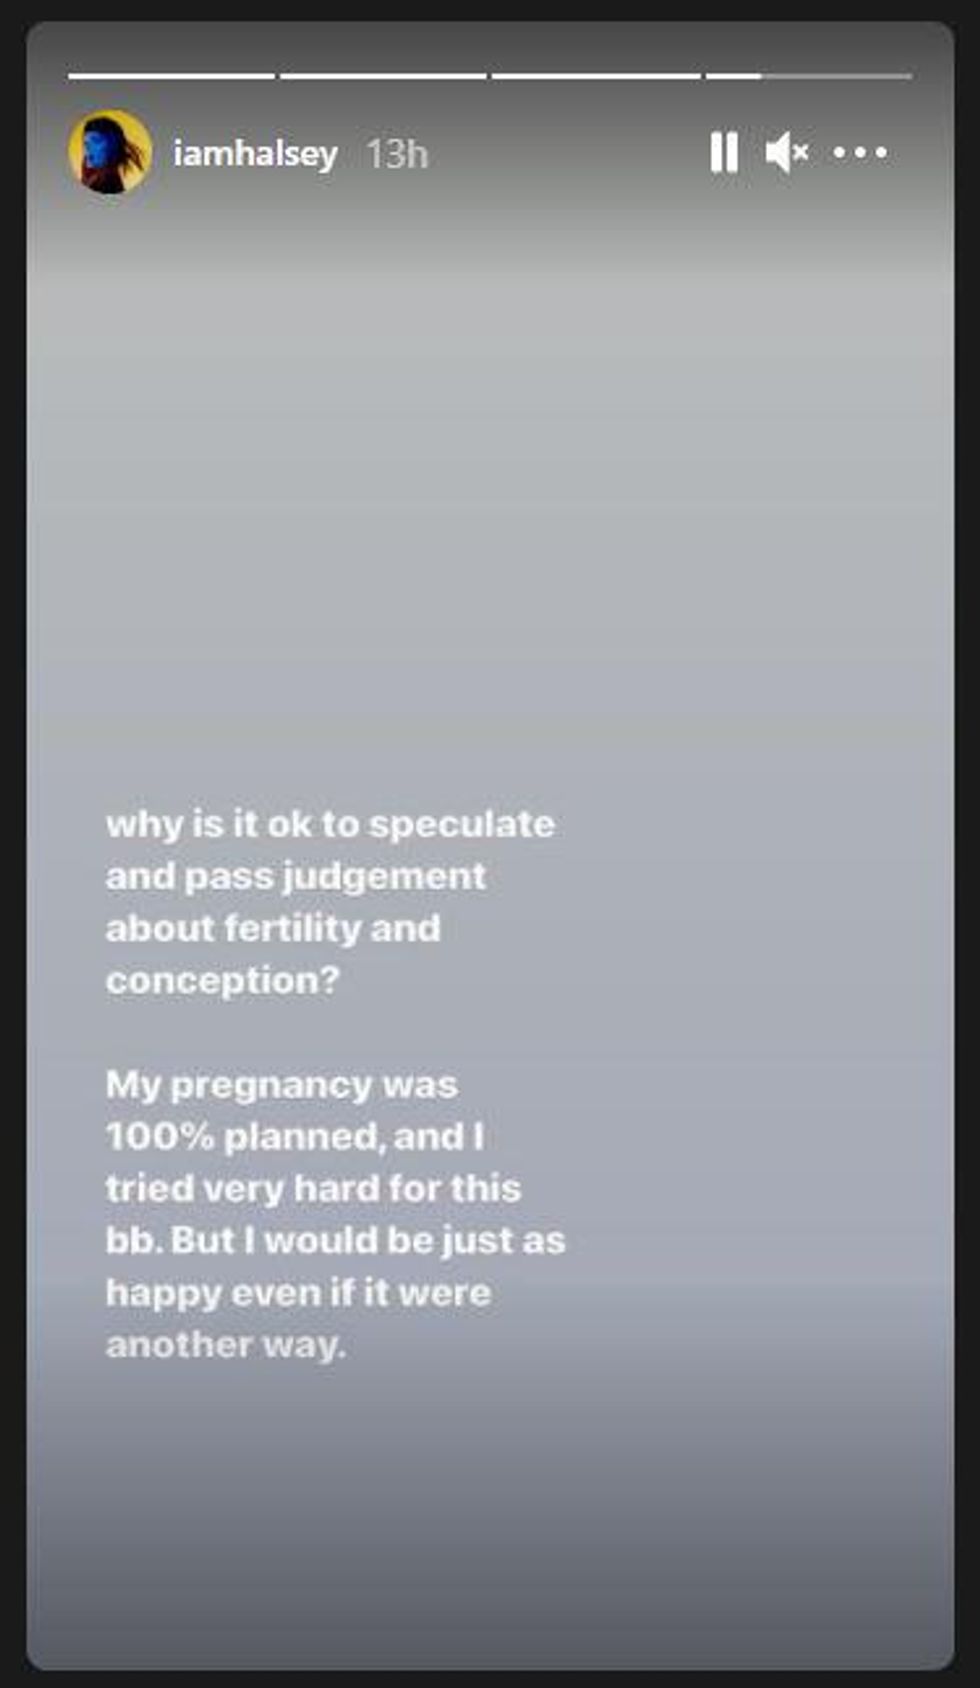 Halsey shuts down speculation on her pregnancy